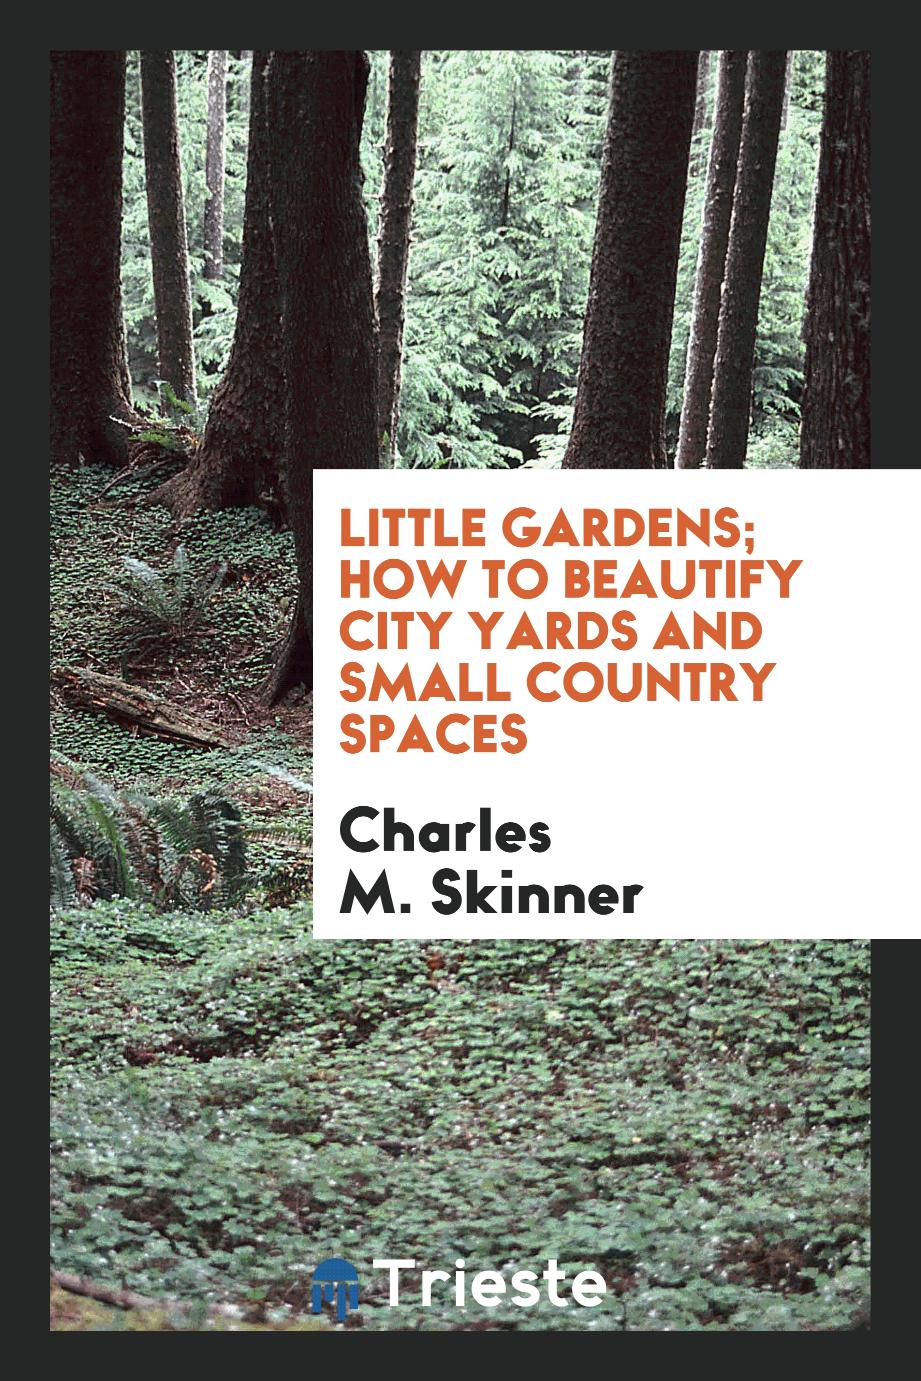 Little gardens; how to beautify city yards and small country spaces